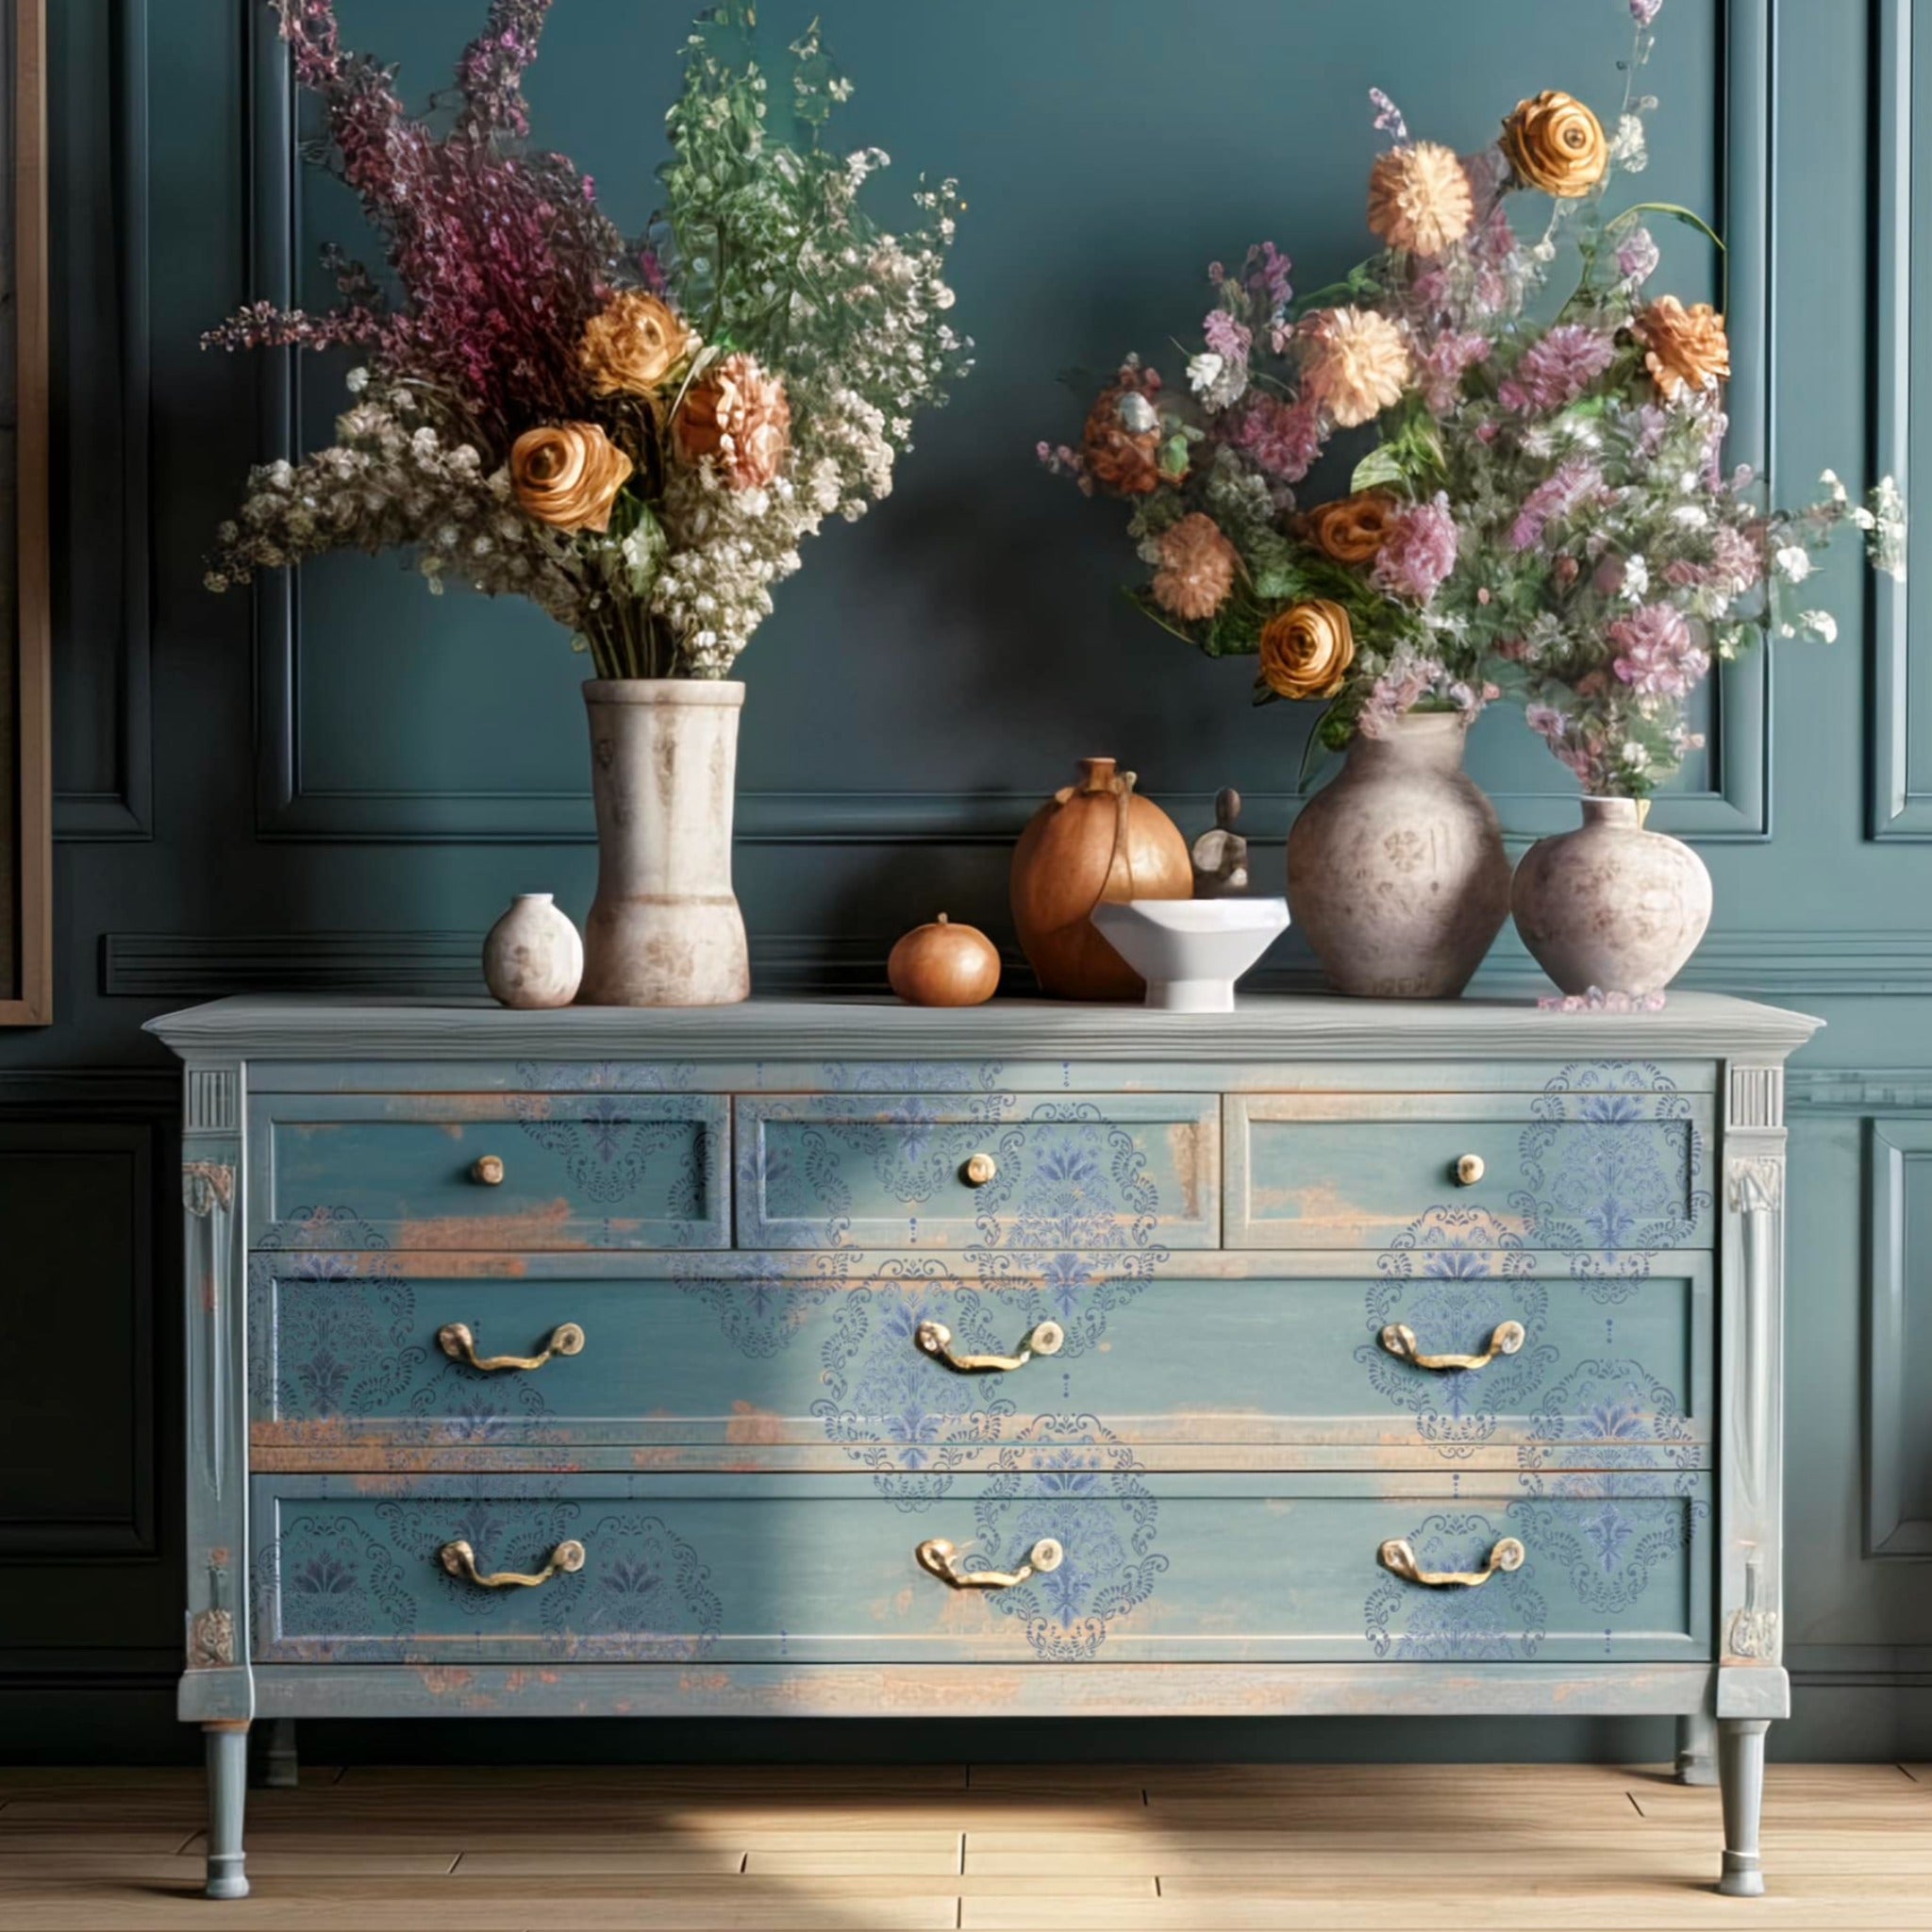 A large dresser is painted a distressed light blue and features ReDesign with Prima's Kacha Dana Damask transfer on its drawers.